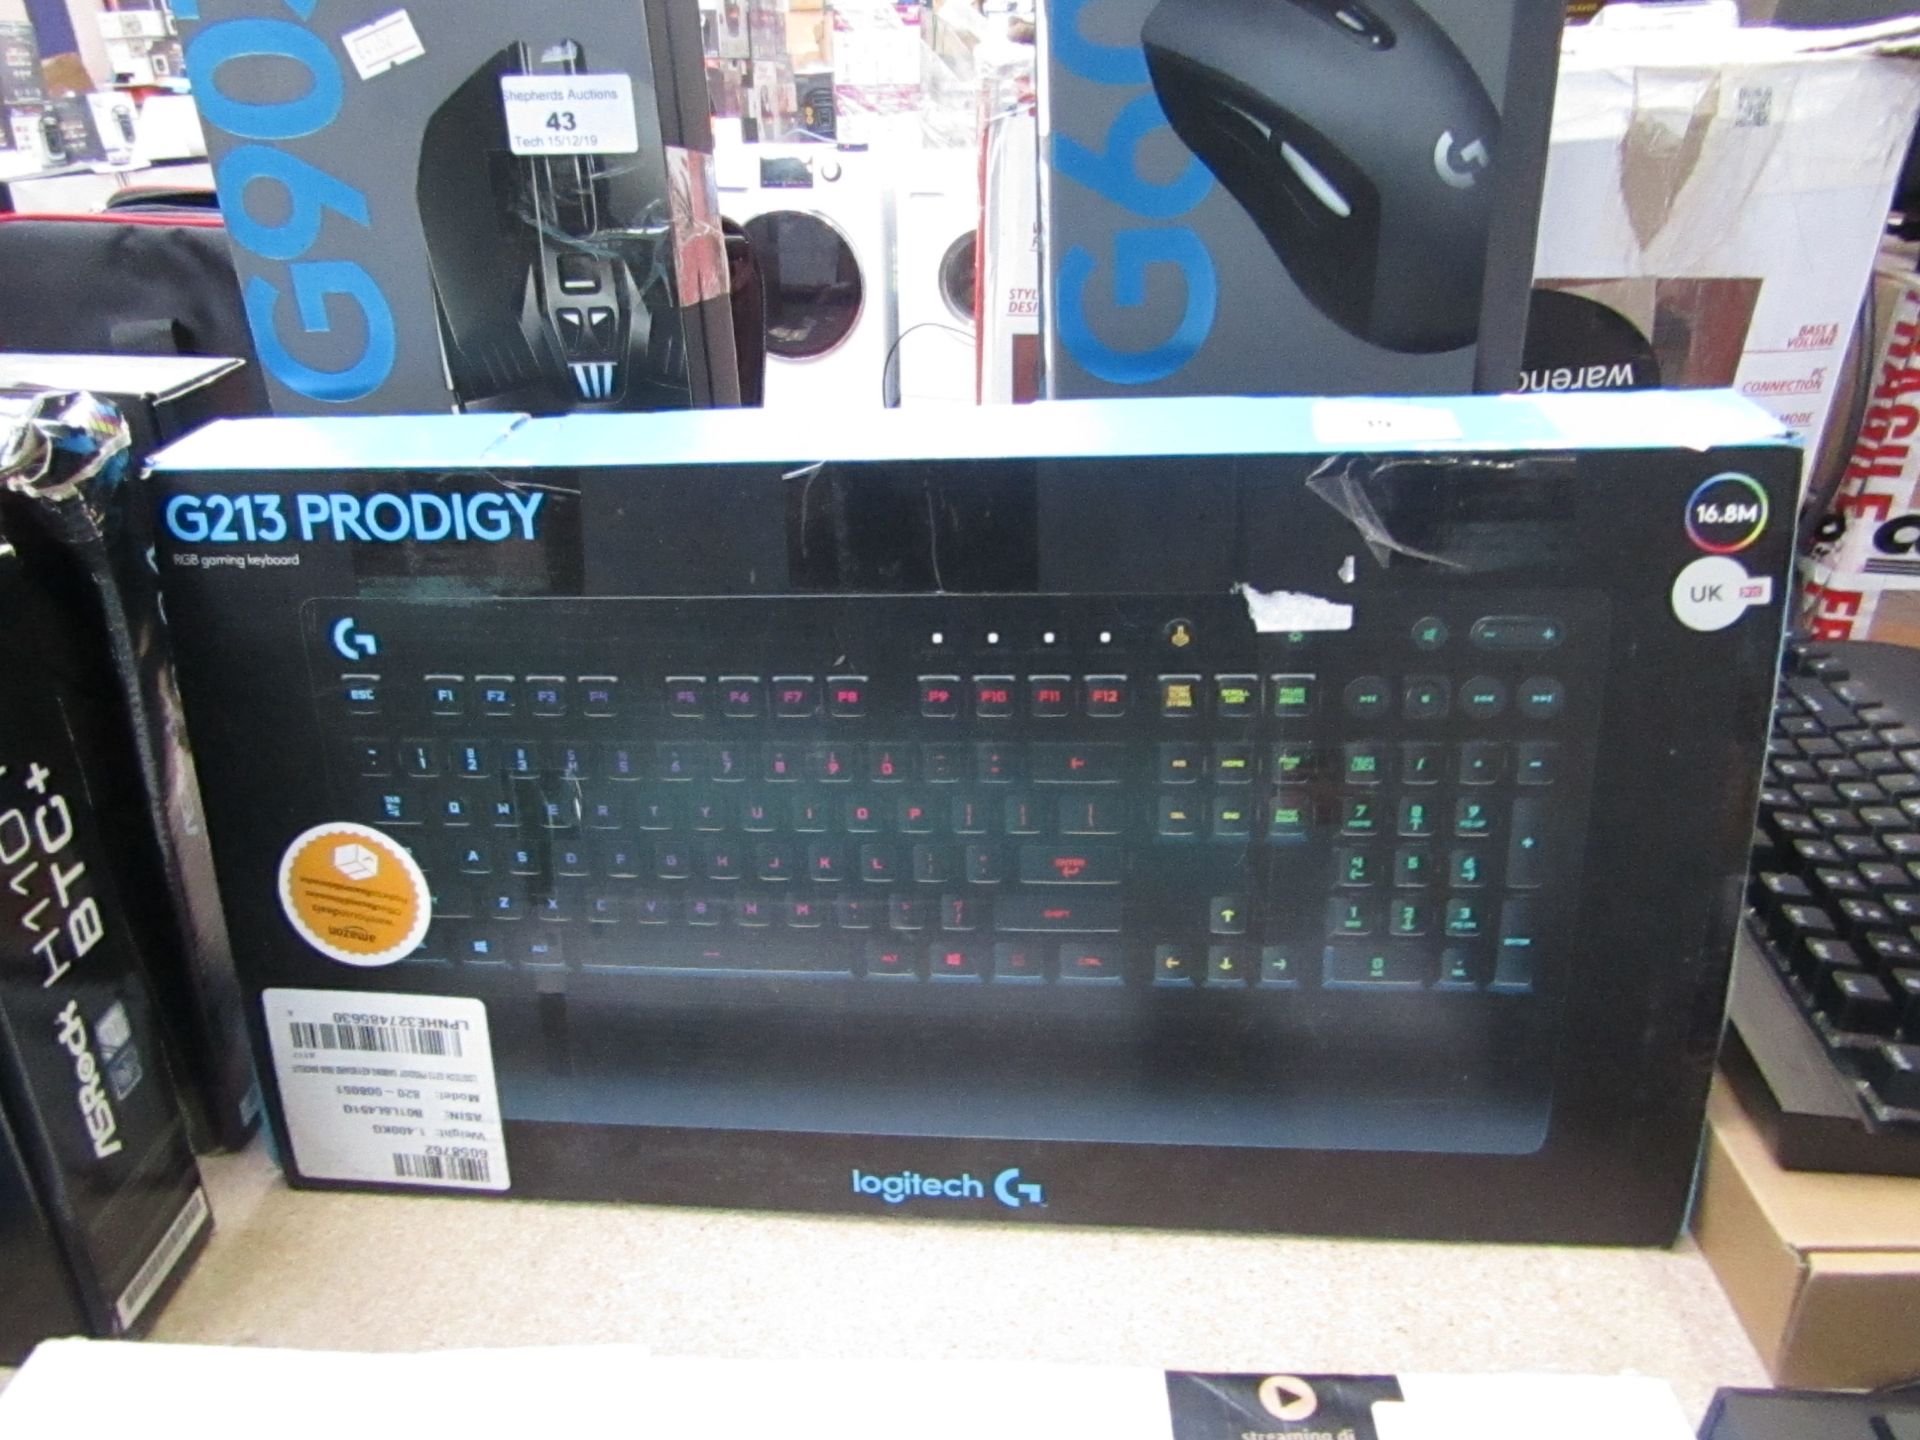 Logitech G213 Prodigy RGB gaming keyboard, untested and boxed.